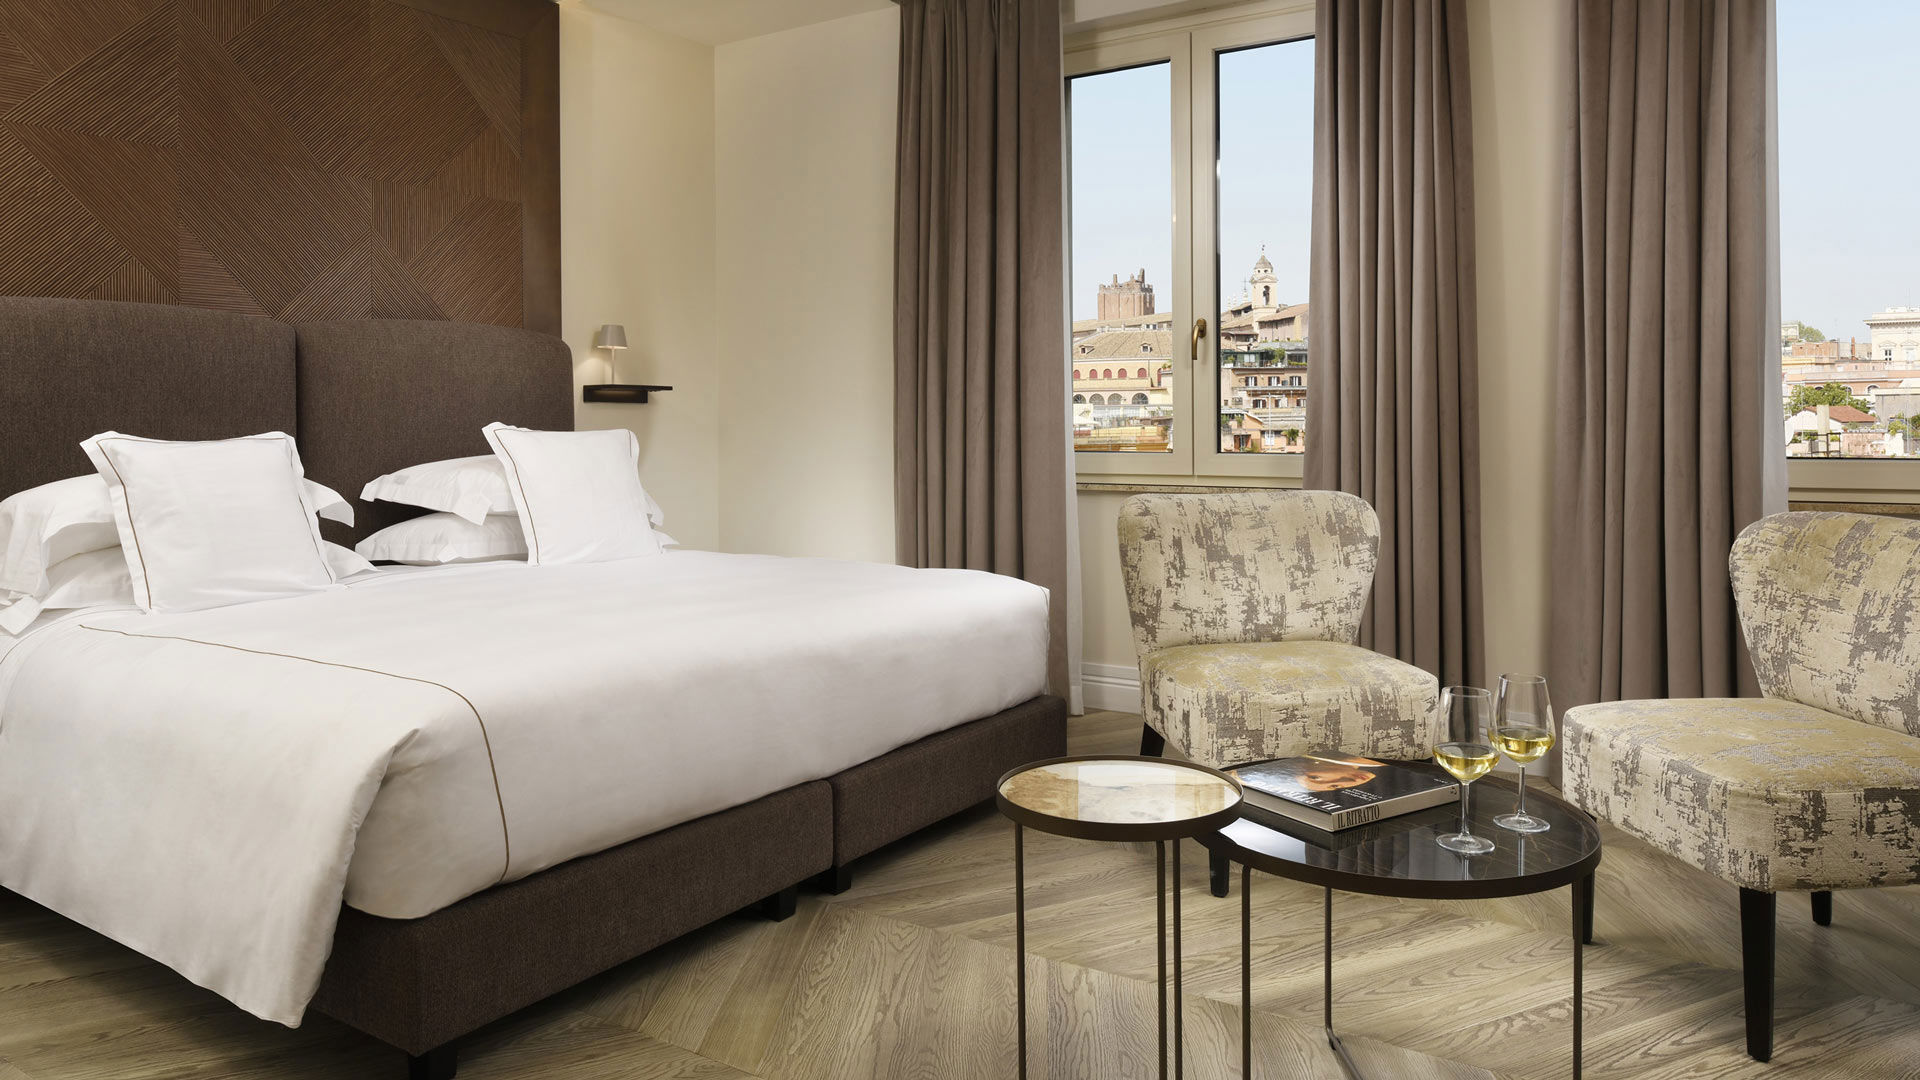 FH55 Hotels - FH55 Hotels in Rome, Florence and Fiesole 7